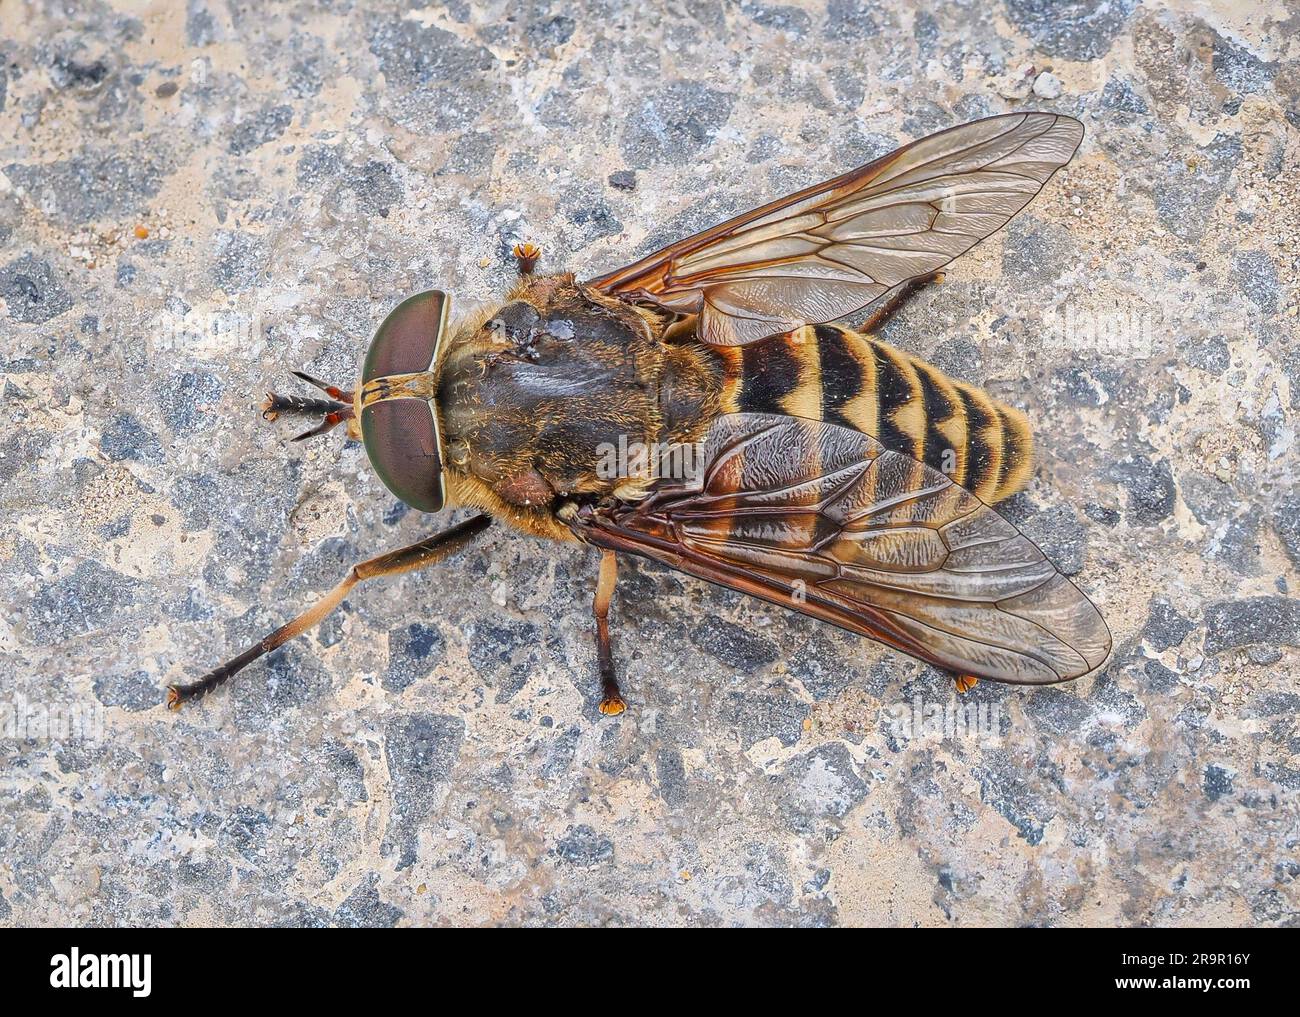 Dark Giant Horsefly Tabanus sudeticus a large fly of the order Diptera which has the distinction of being the heaviest fly in Europe - Wales UK Stock Photo